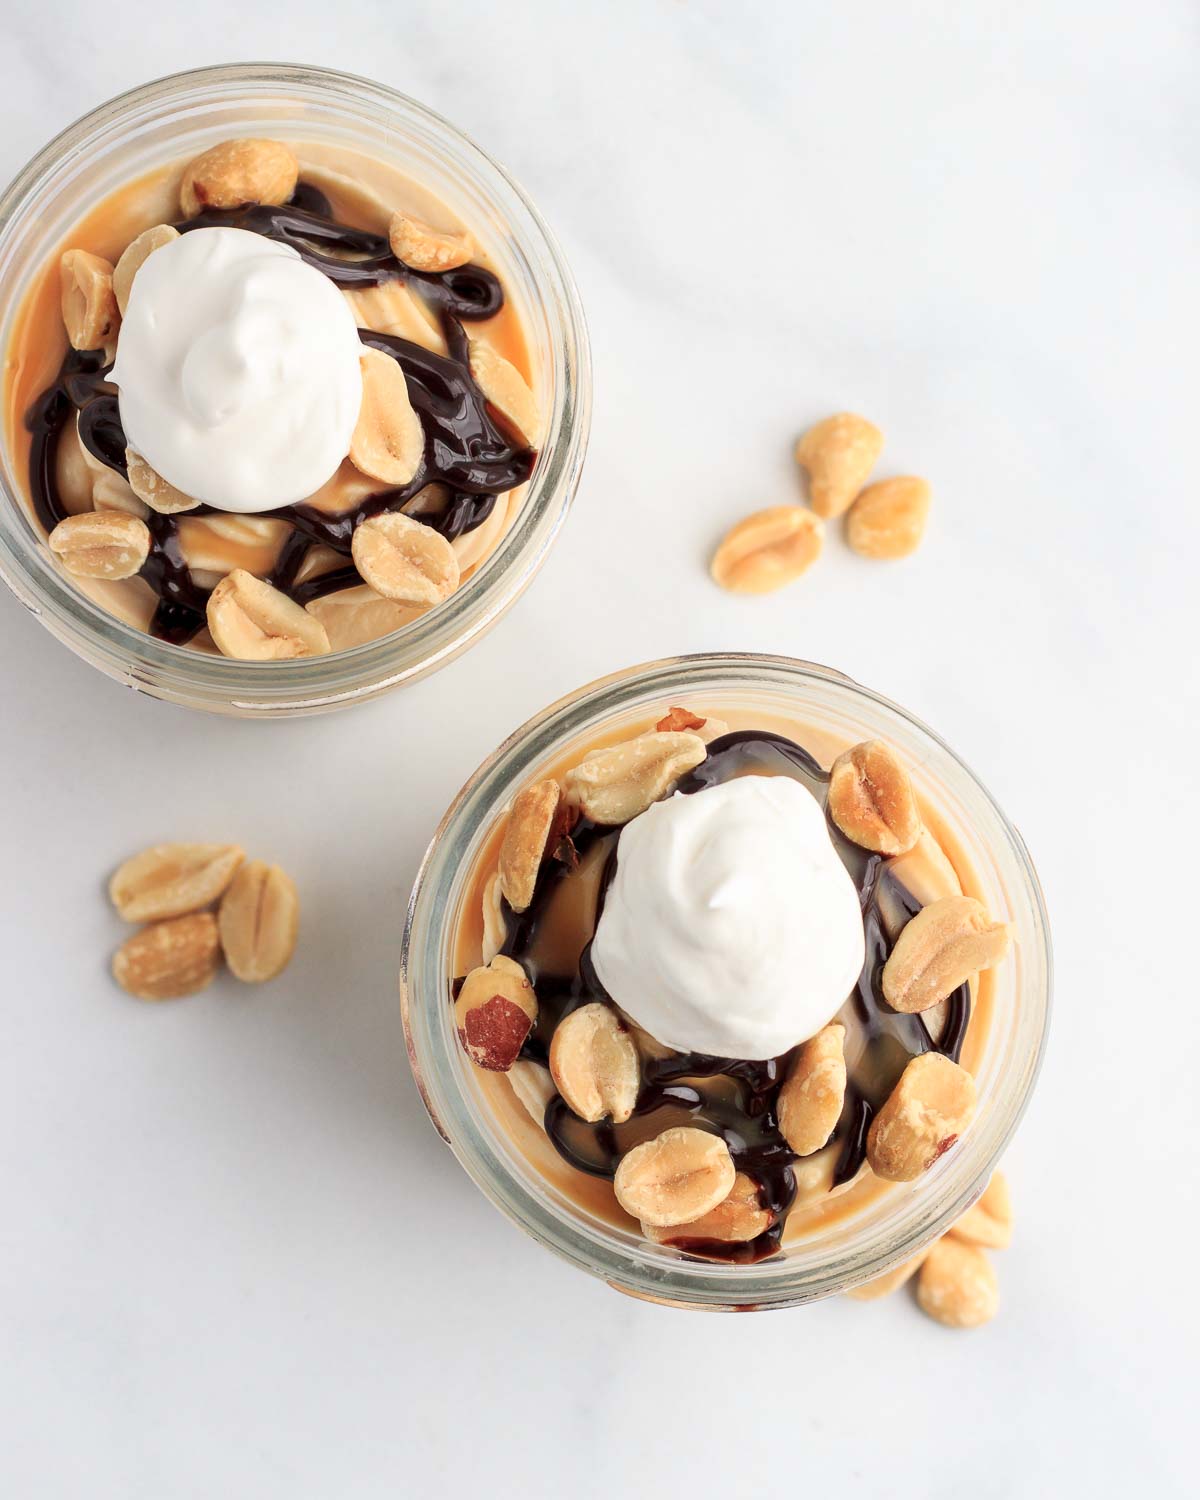 Two cups of keto peanut butter cheesecake mousse with chocolate and caramel syrup and peanuts.